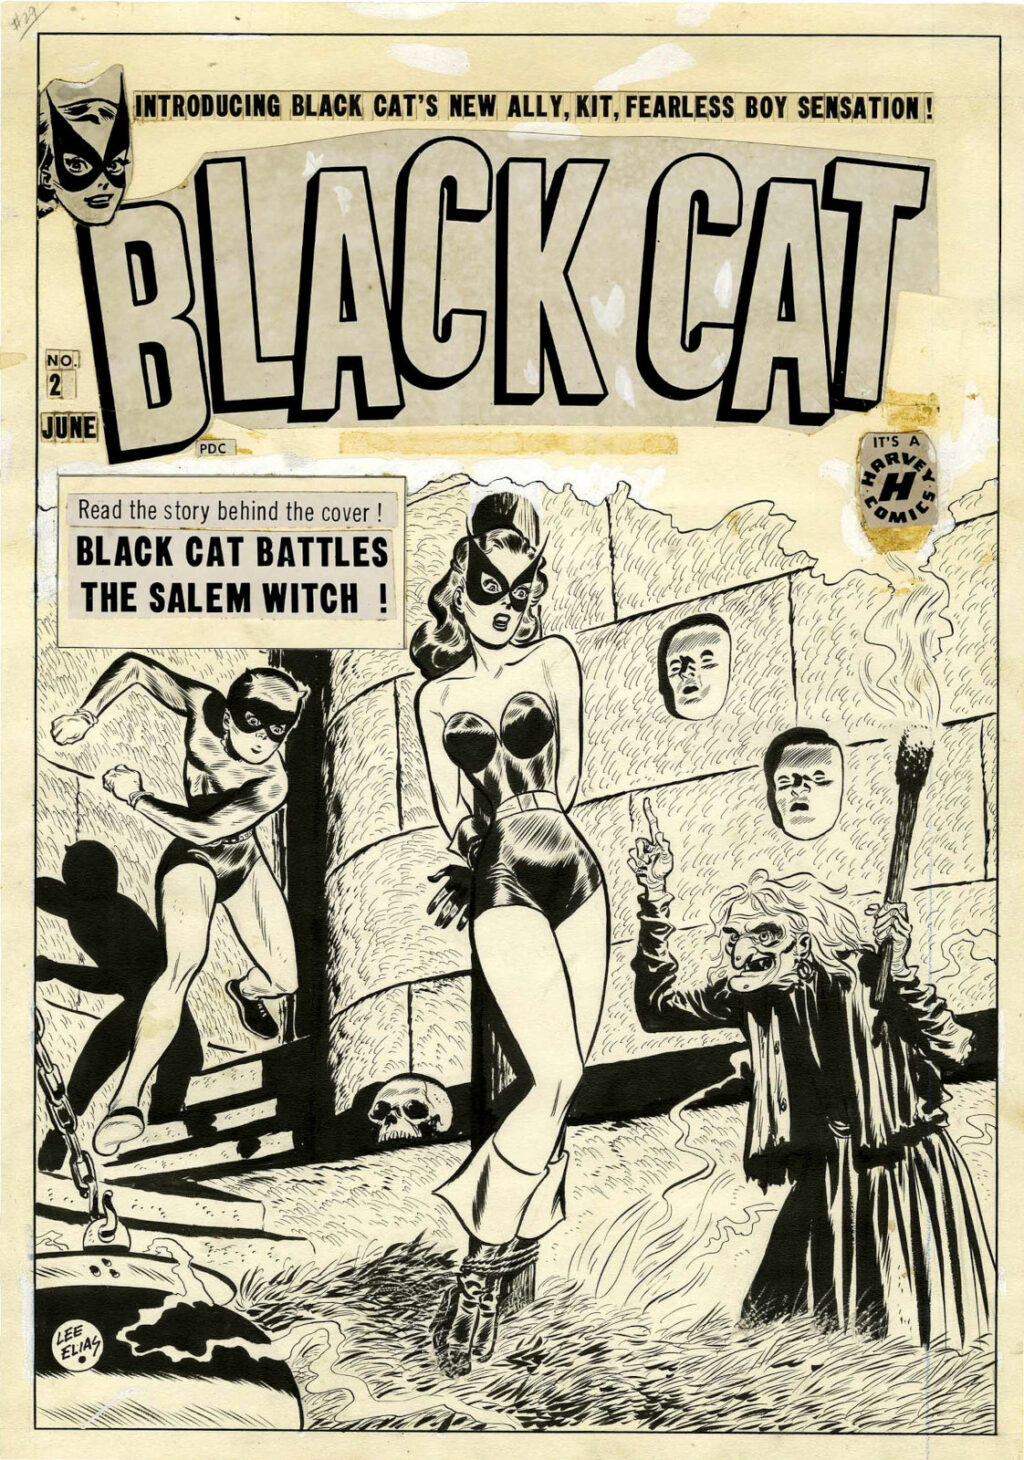 Black Cat Mystery Comics issue 29 cover by Lee Elias